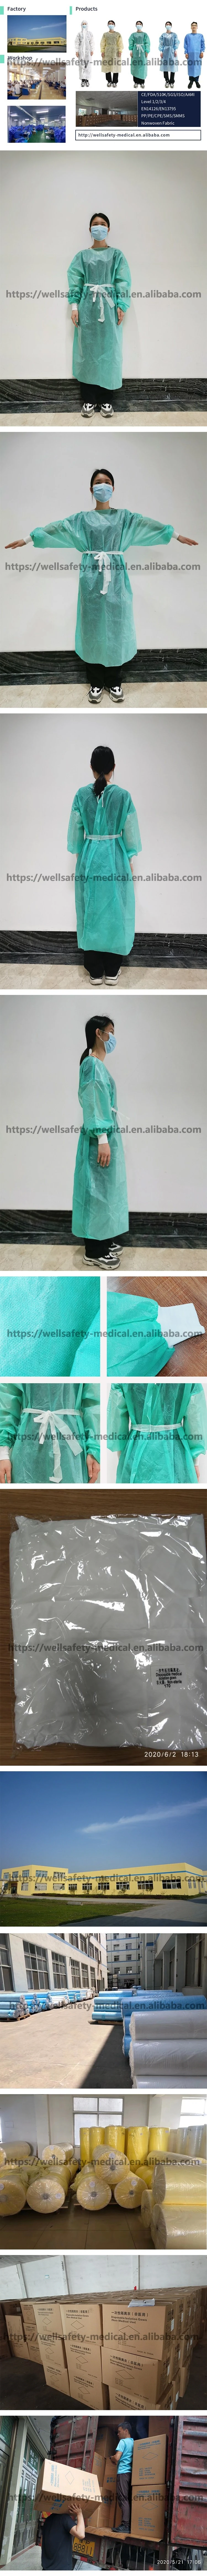 Hot Selling 45gram Disposable SMS/PP/PE/ Nonwoven Waterproof Isolation Gown Safety Xxxl Size Suit FDA Ce ISO Non-Sterile ANSI/AAMI PB70 Level 2 Level 3 Level 4